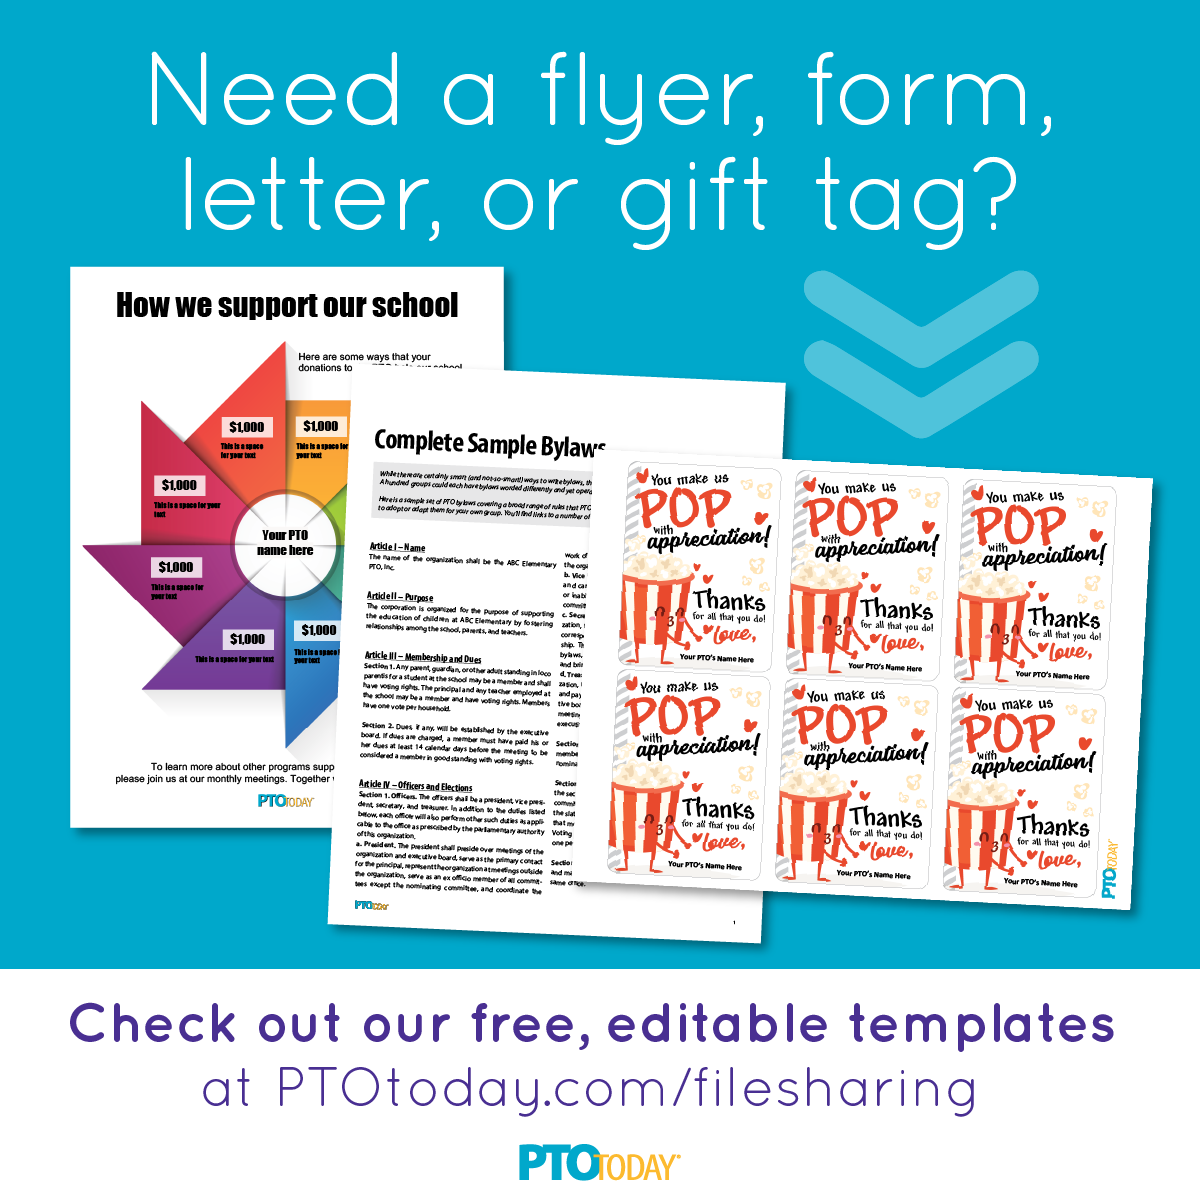 Check out our free, editable templates